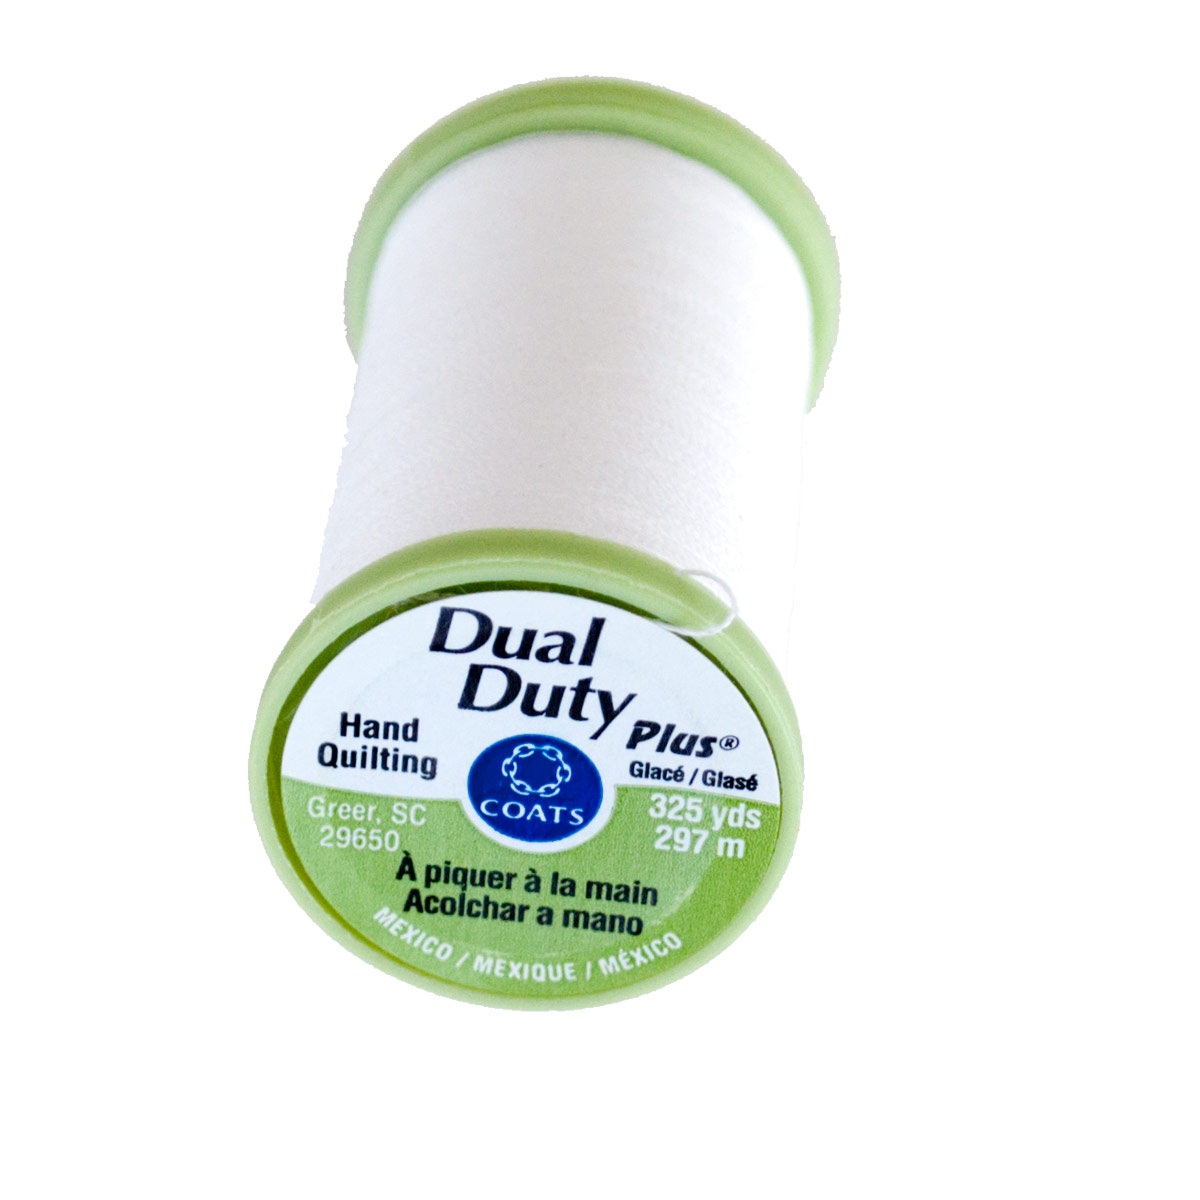 Coats Dual Duty Plus Hand Quilting Thread 325yd - S960 White Pack of 3